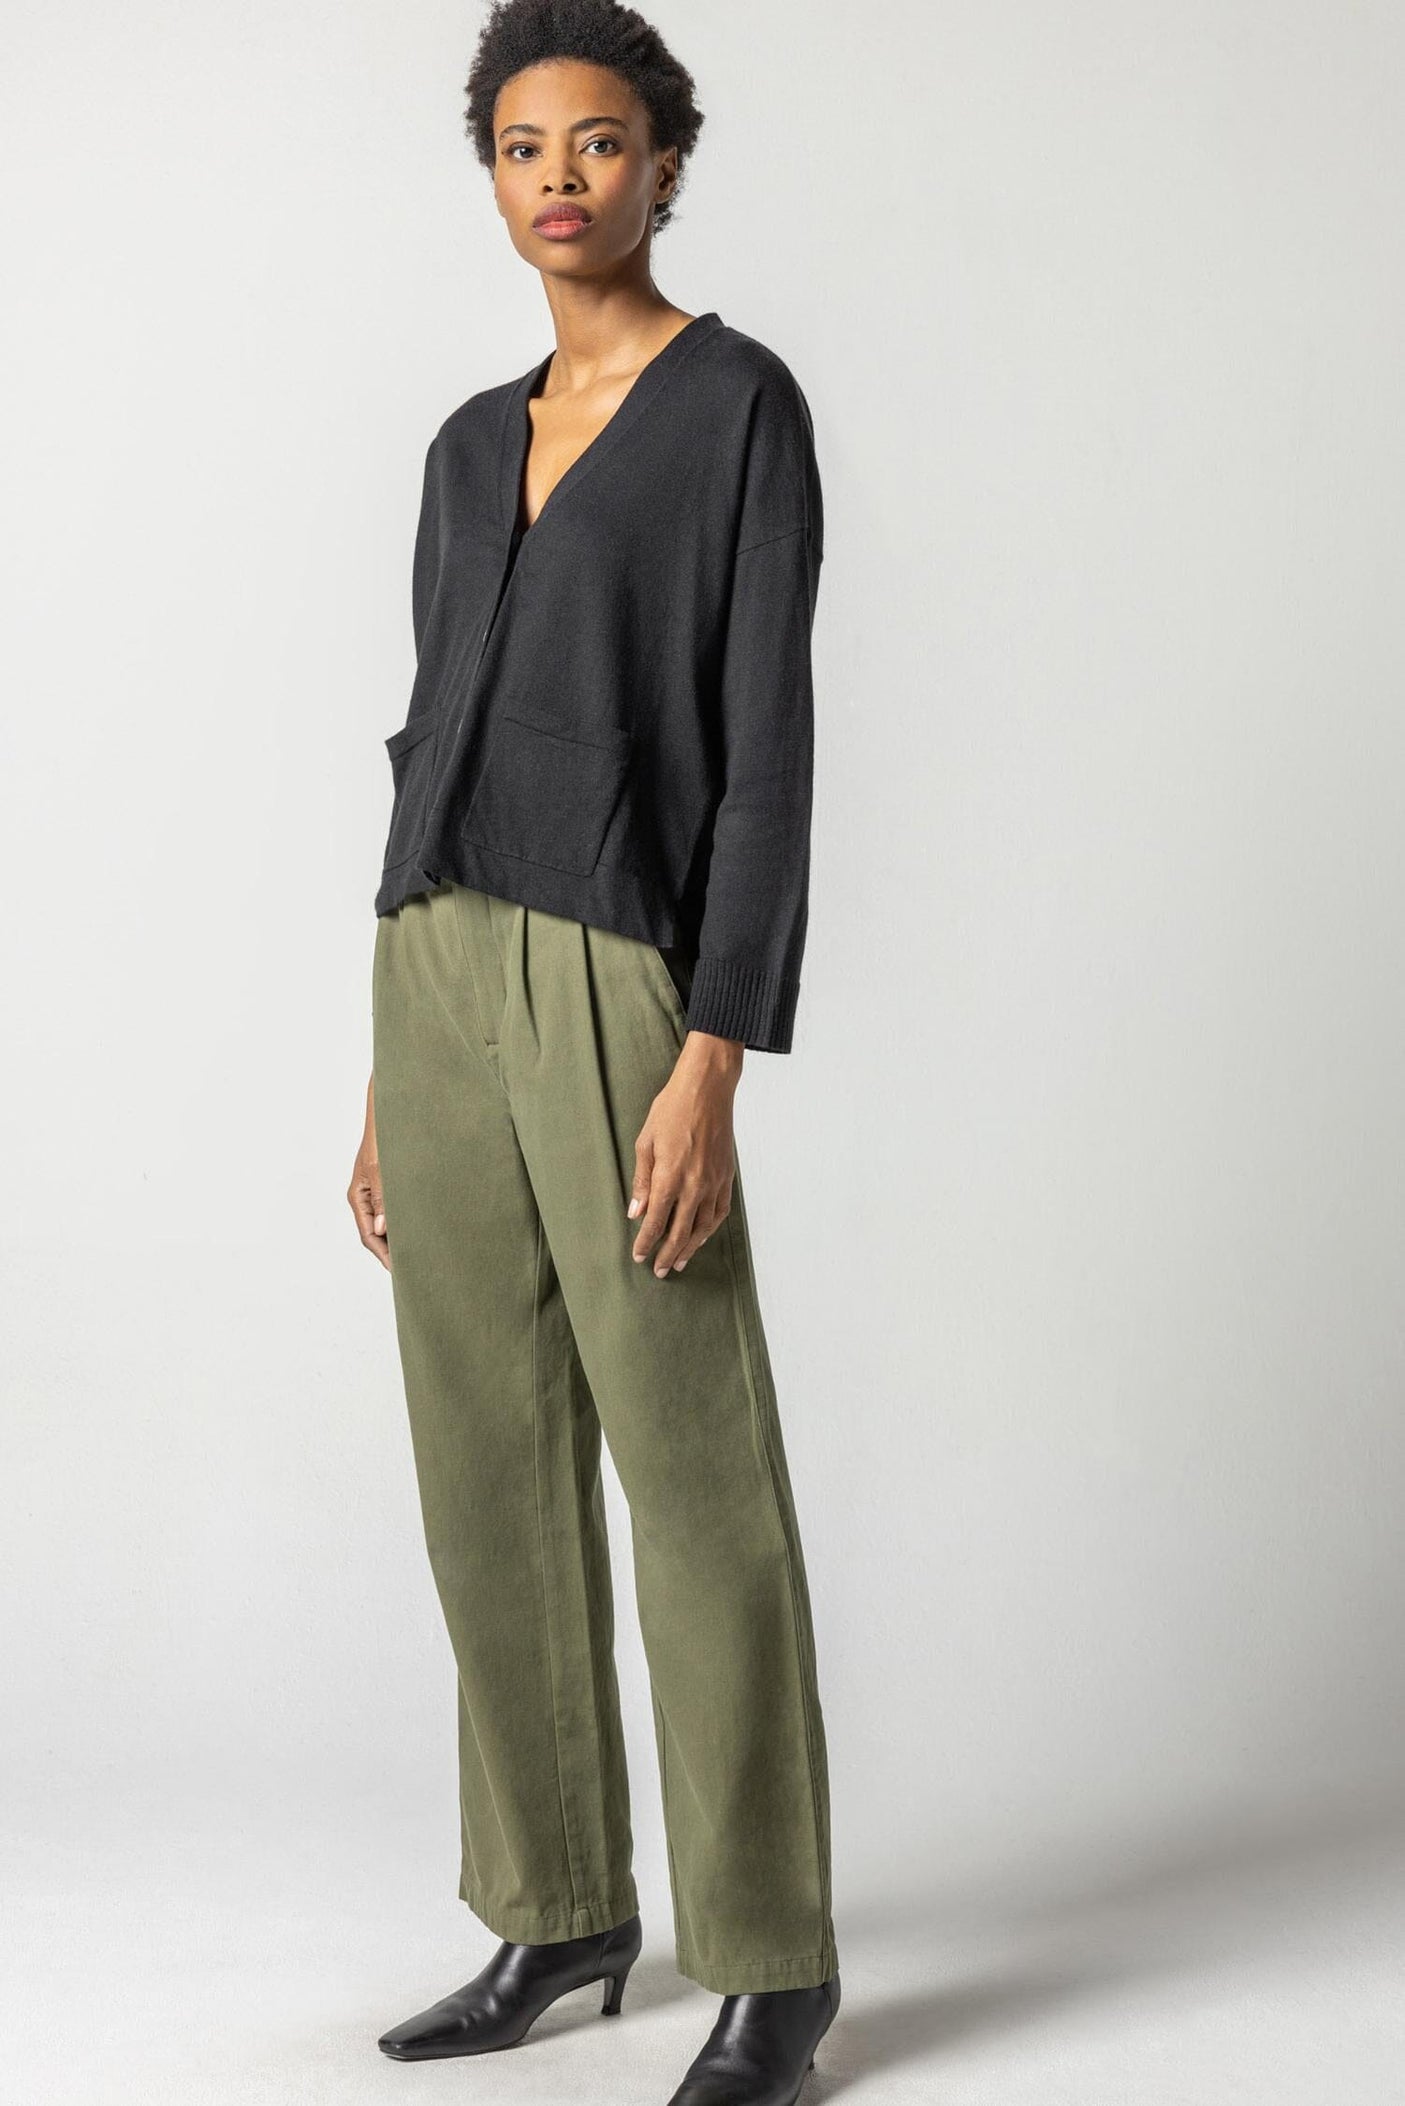 Pleat Front Pants by BY JOHNNY. Online | THE ICONIC | Australia